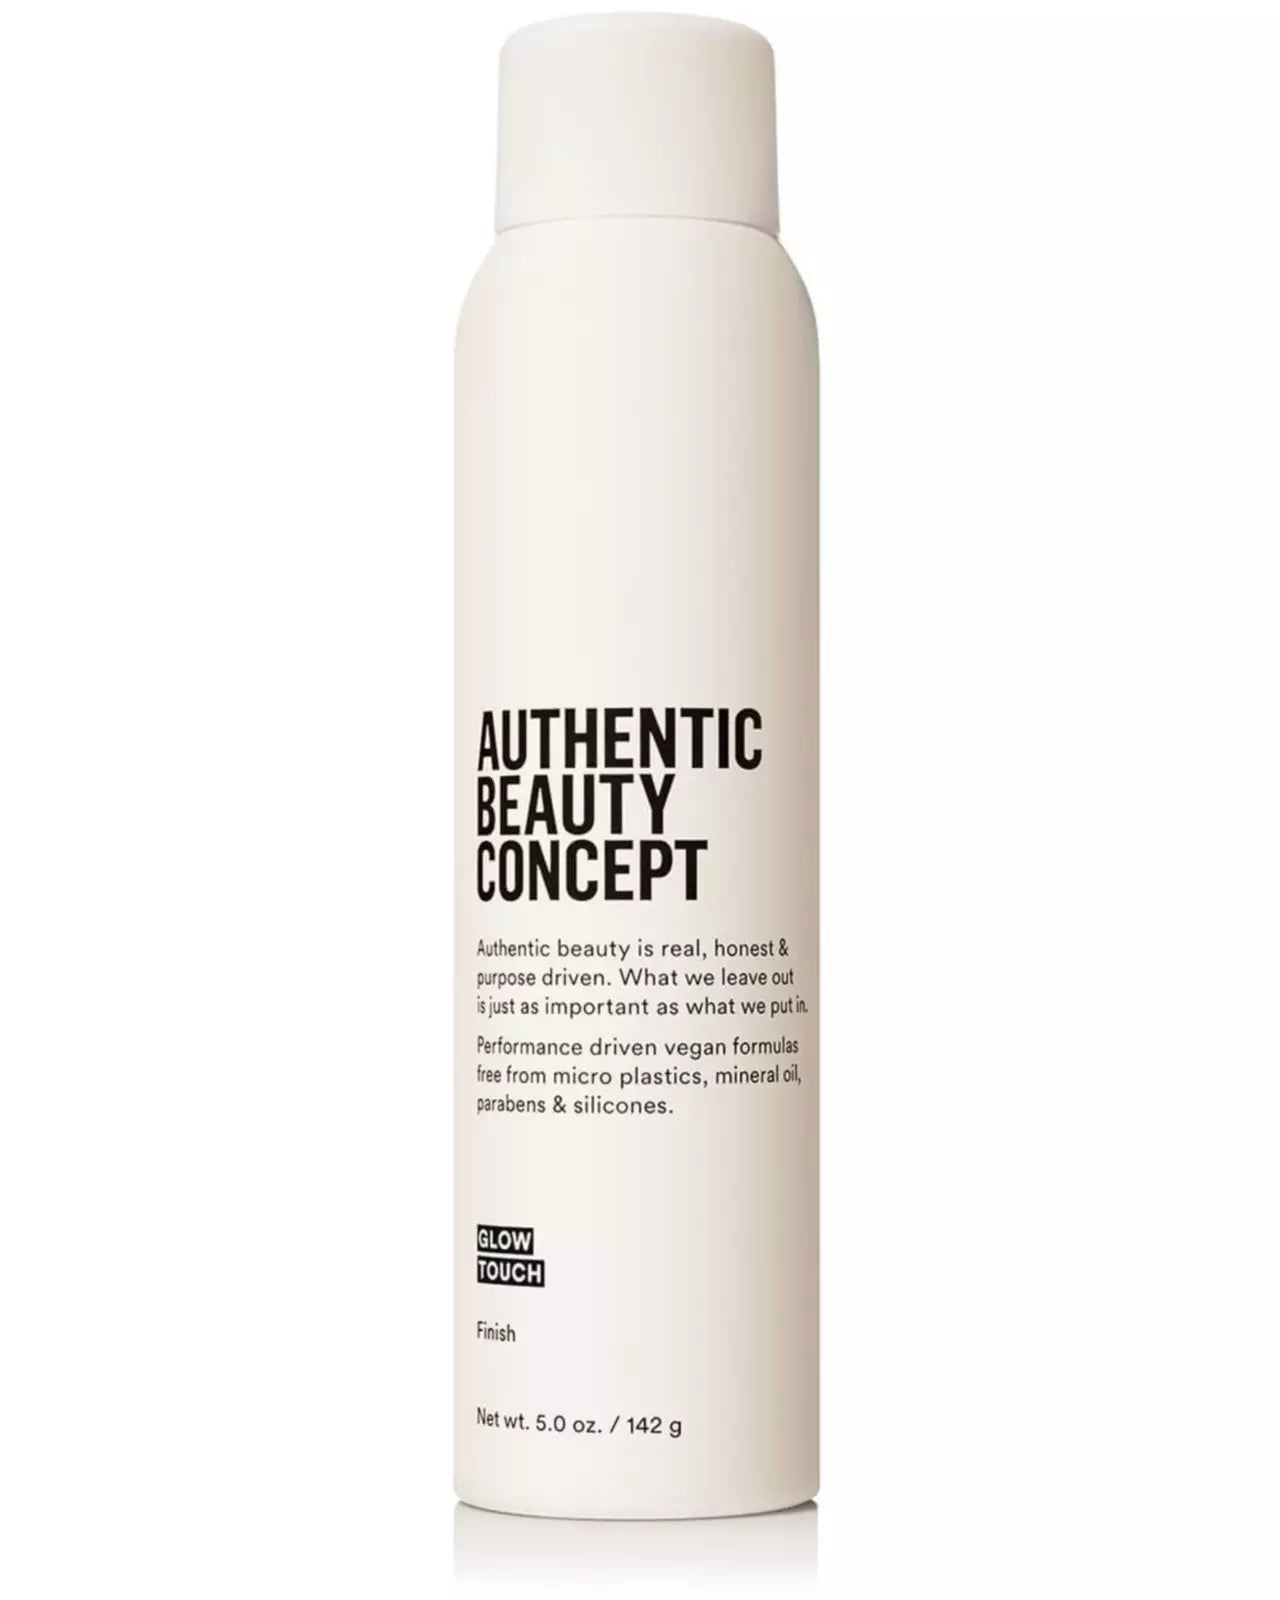 Authentic Beauty Concept Glow touch